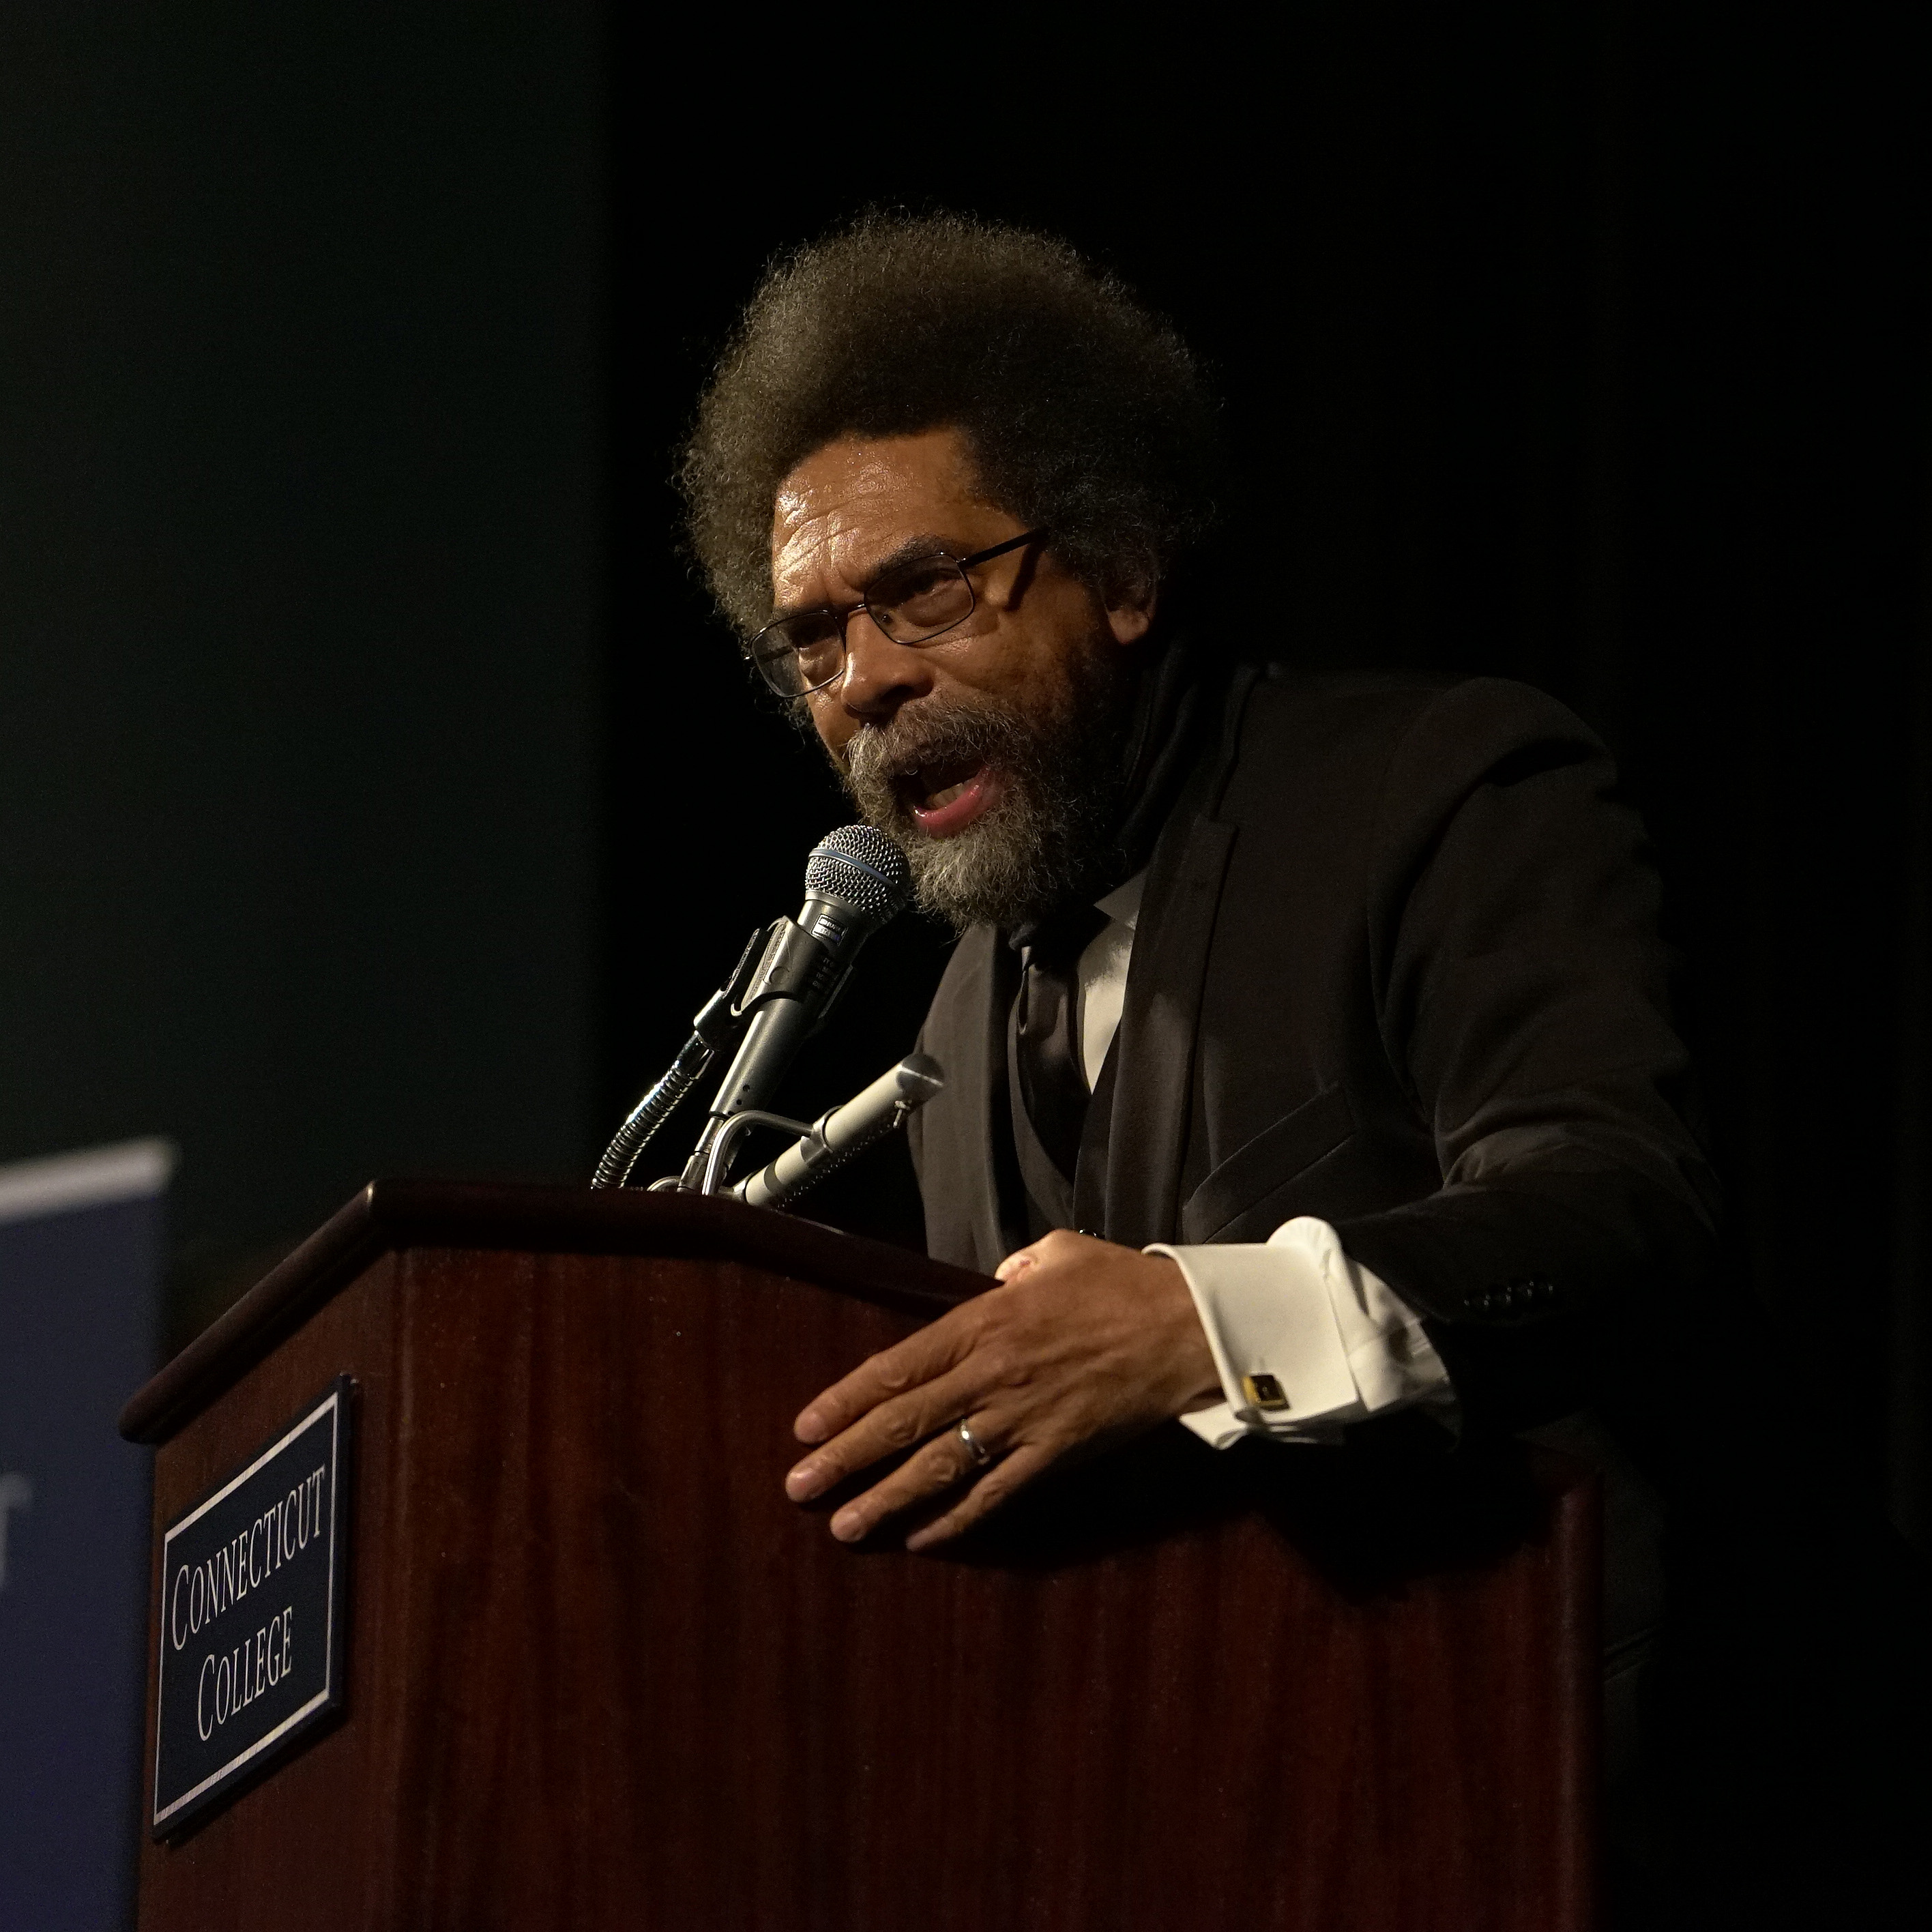 Cornel West addressed the campus community 10 years after presenting the keynote address at the CCSRE's inaugural event.